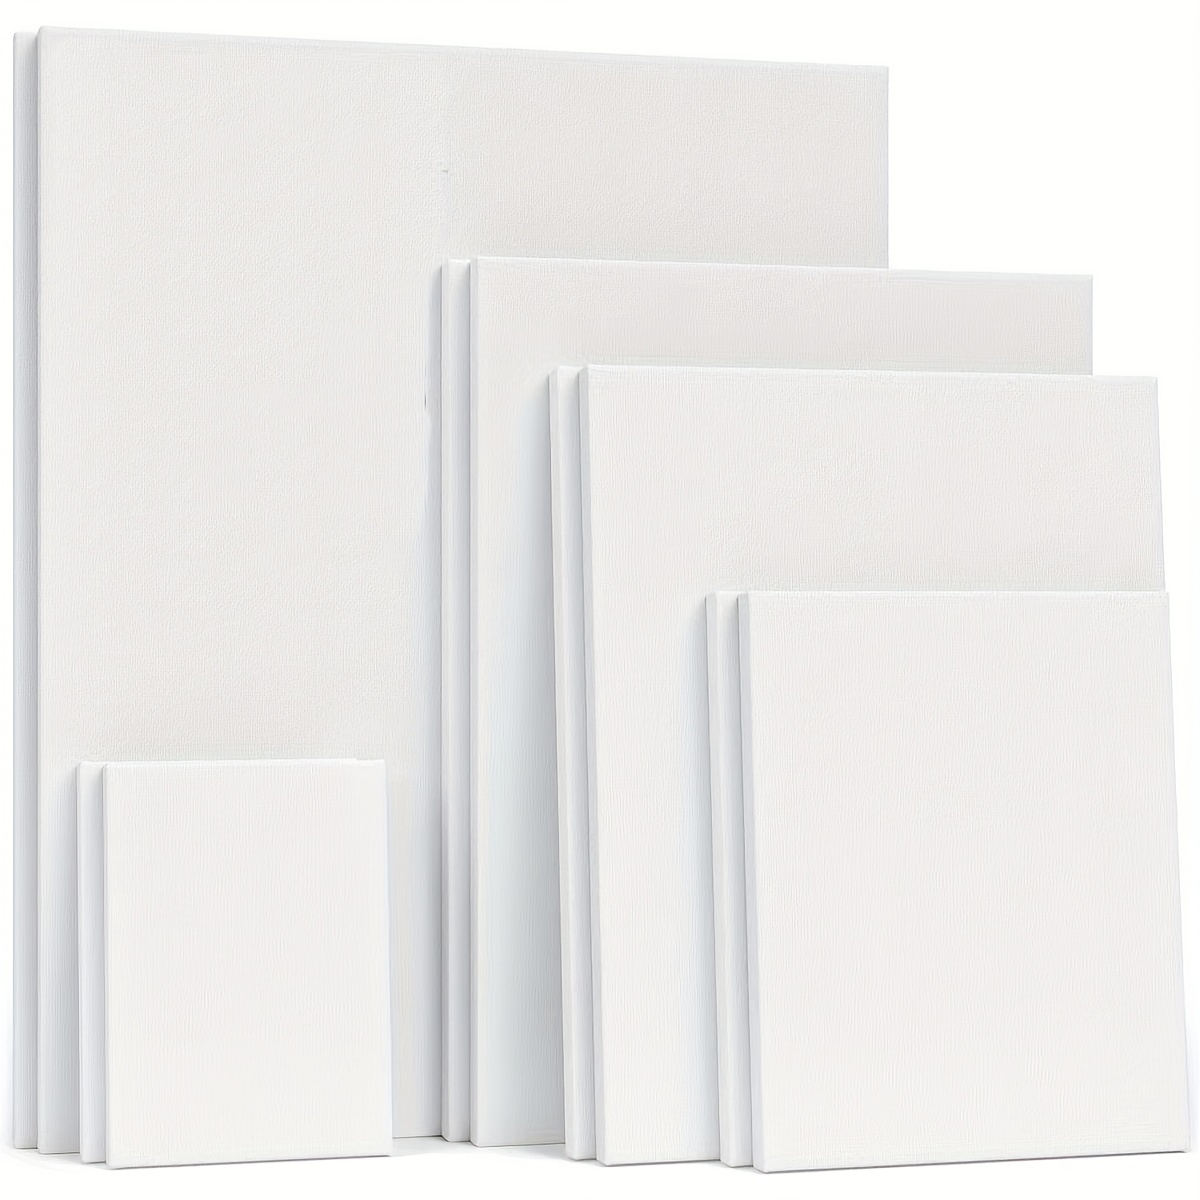 Arteza Stretched Canvas, Pack of 8, 10 x 10 Inches, Square Blank Canvases,  100% Cotton, 8 oz Gesso-Primed, Art Supplies for Acrylic Pouring and Oil  Painting